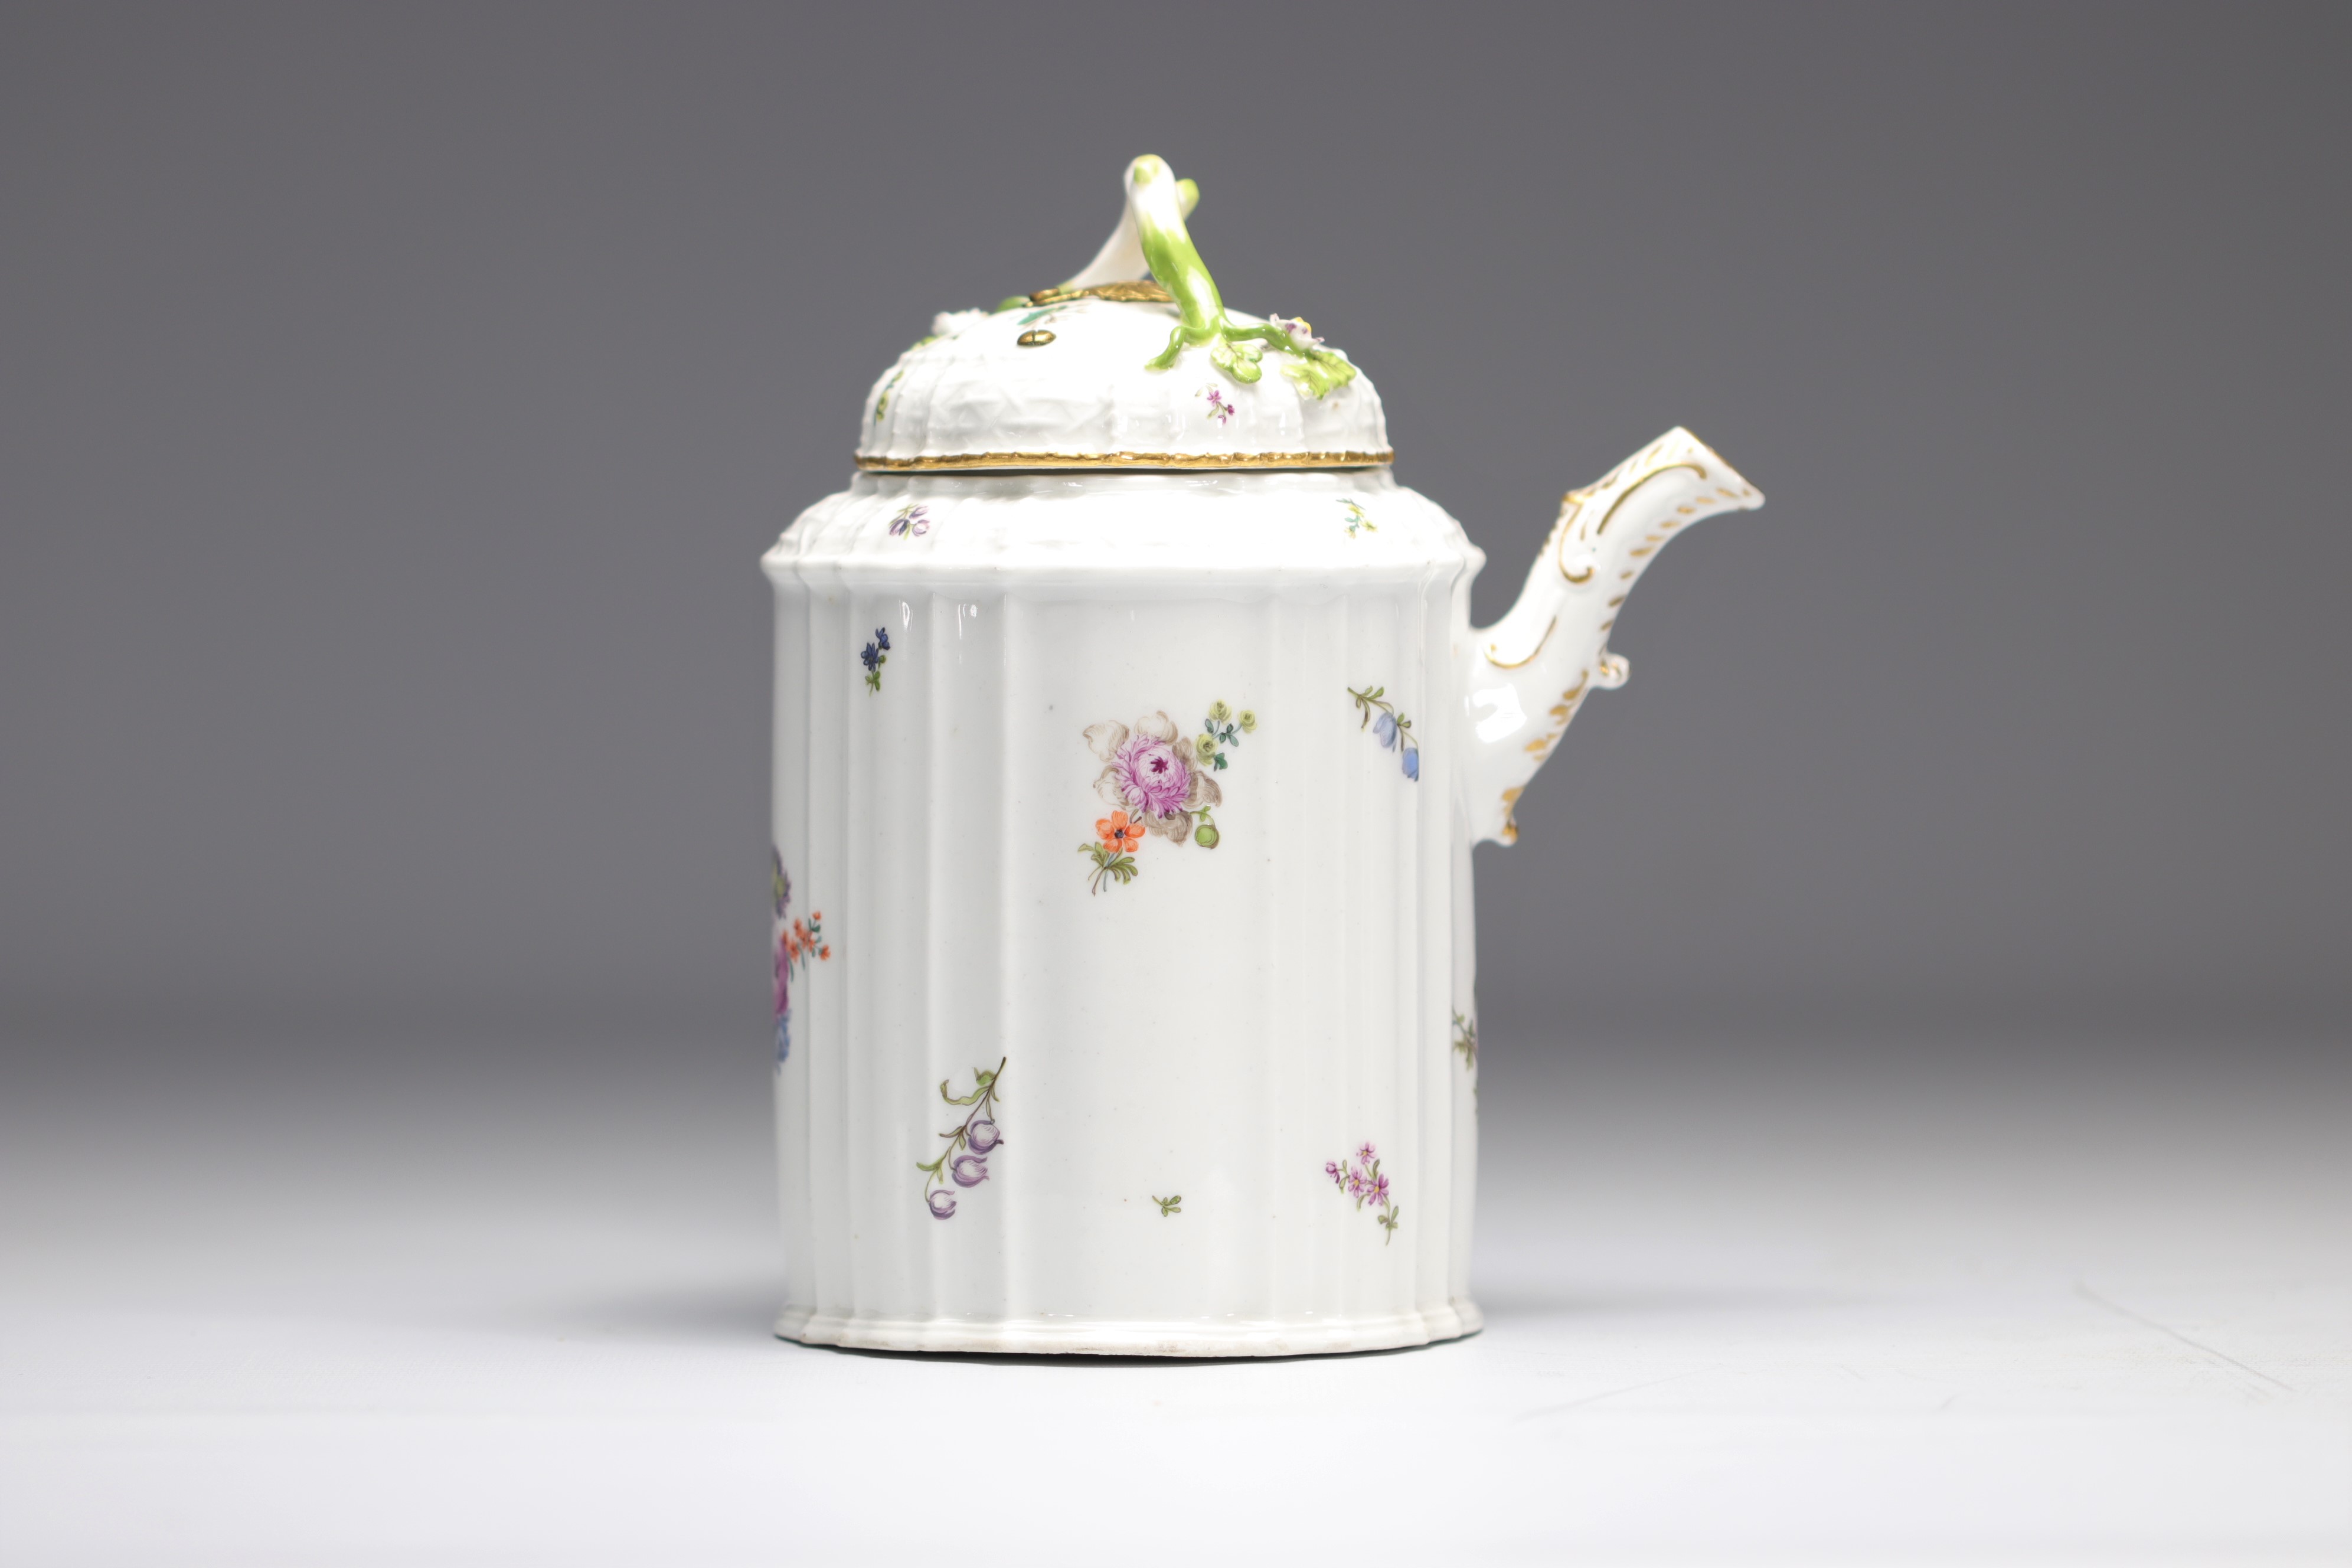 Porcelain chocolate pot from 18th century - Image 3 of 3